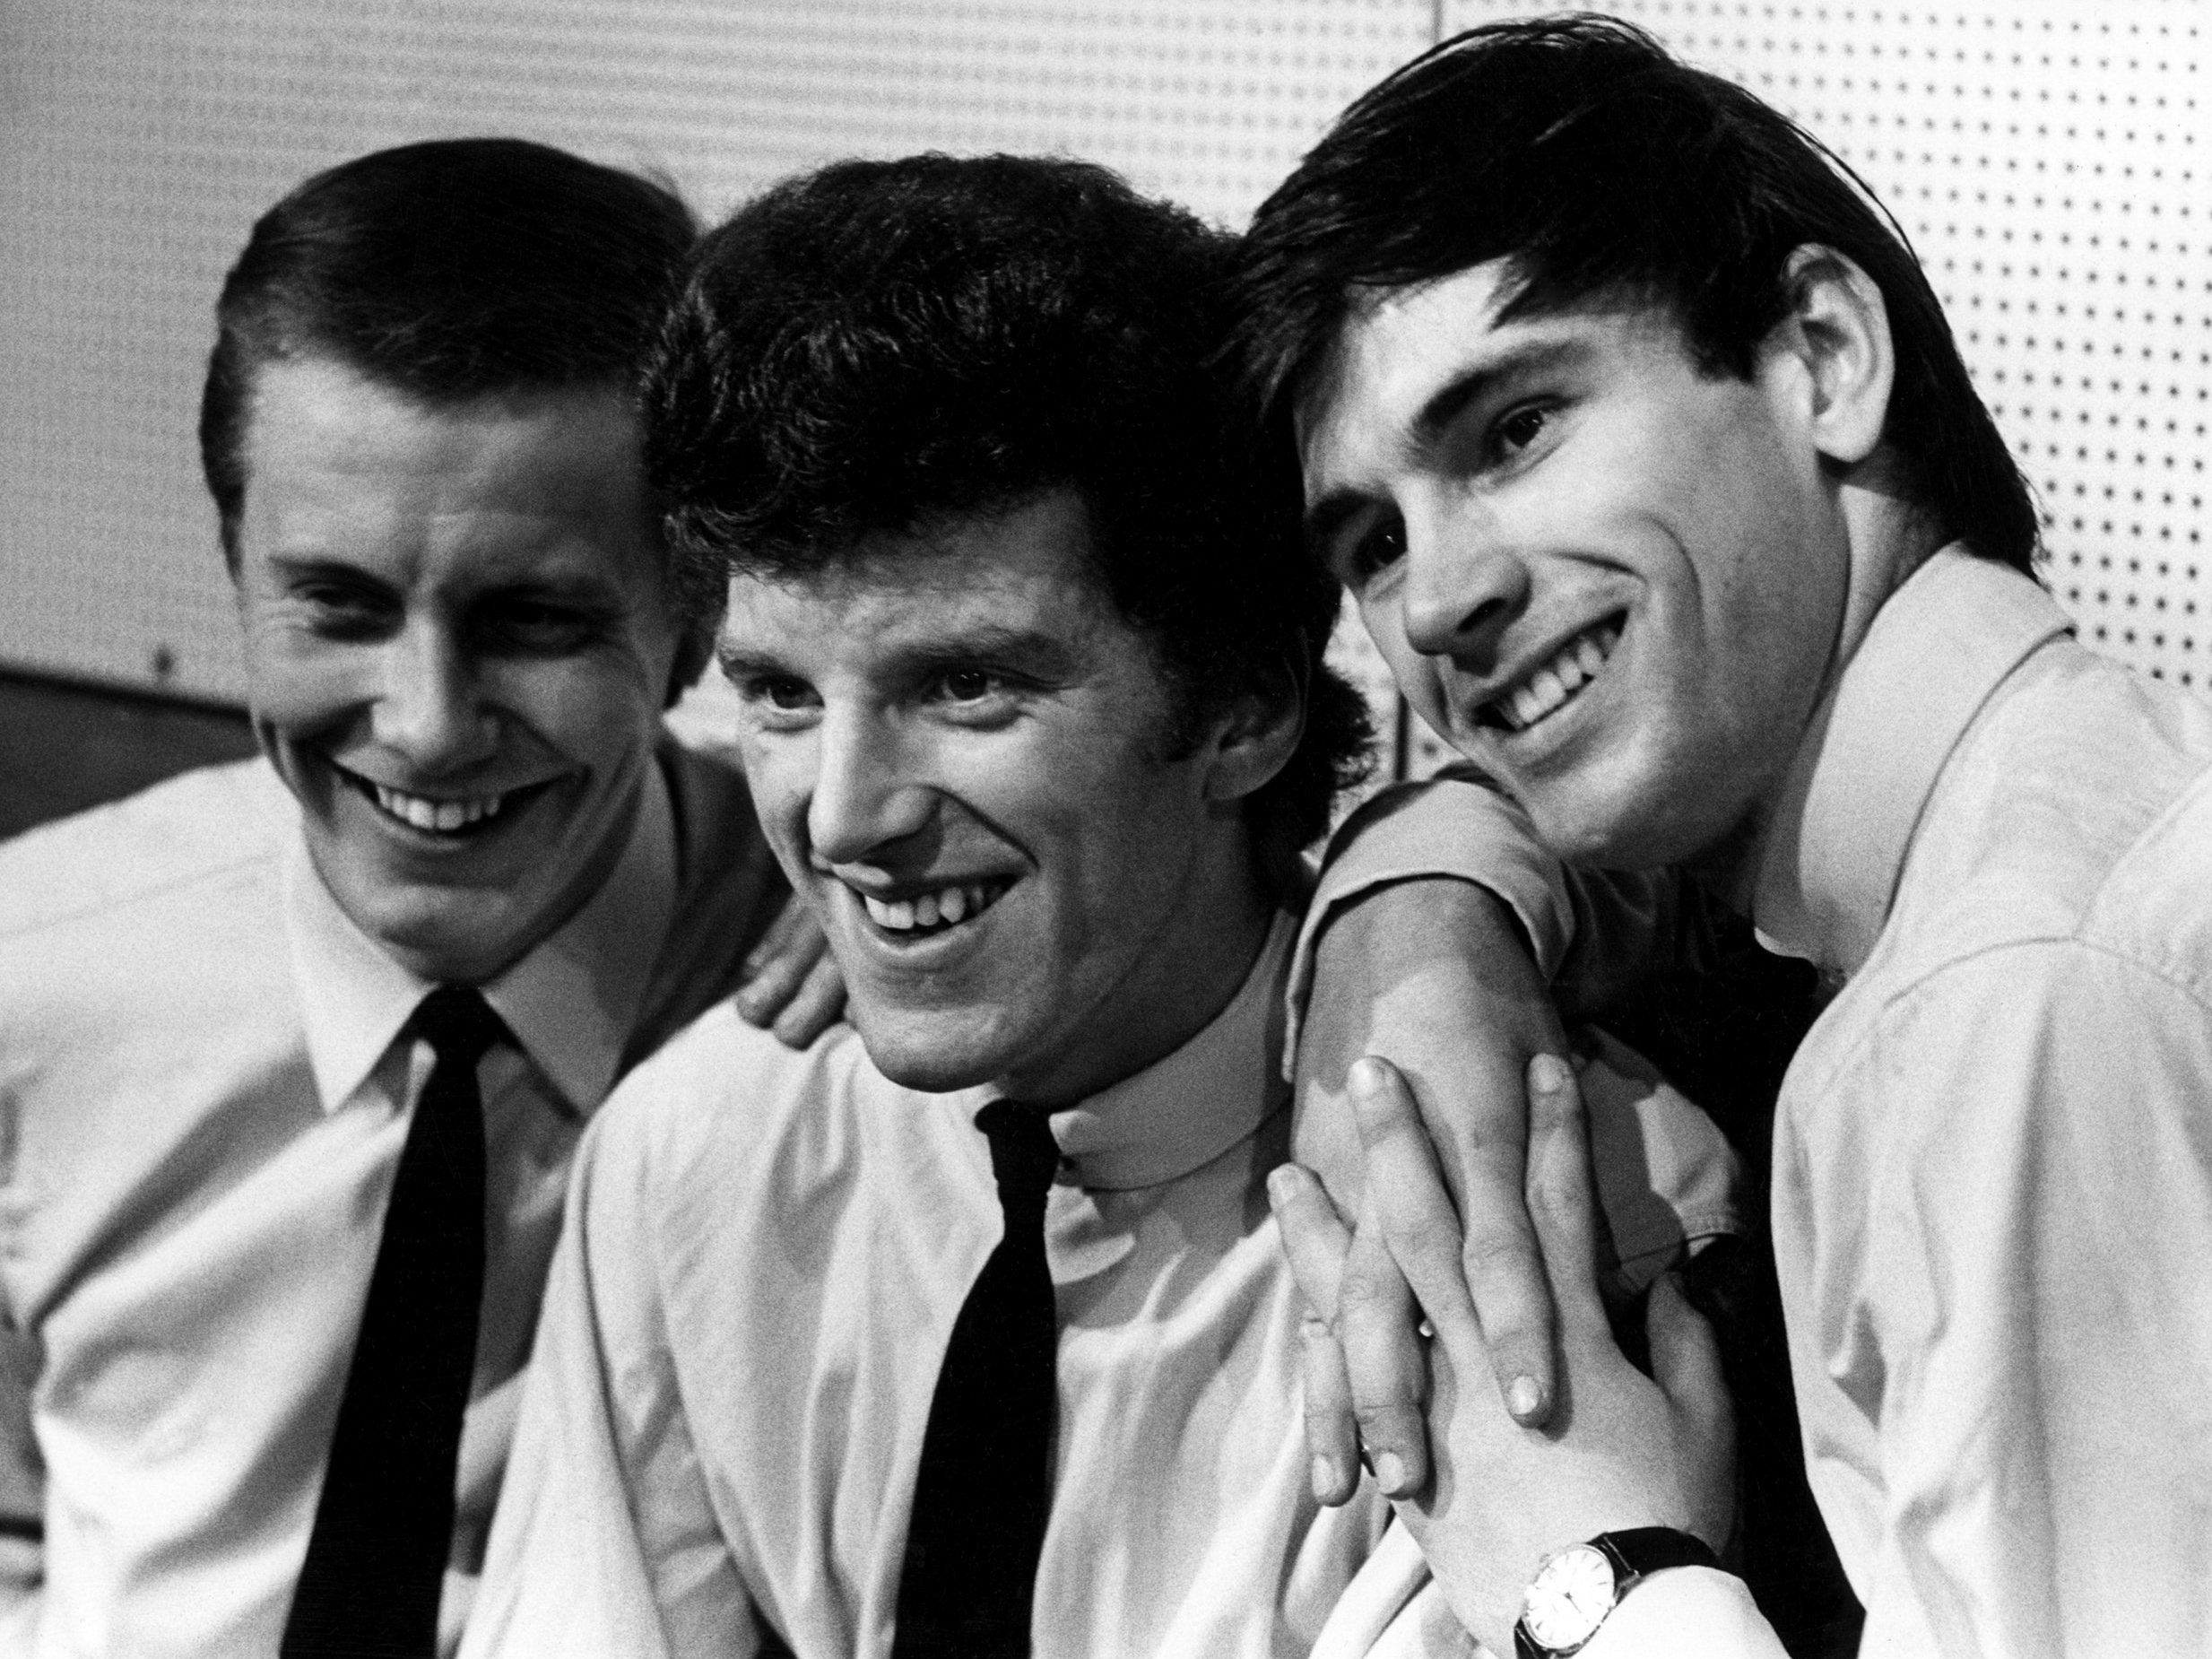 Hutchinson (centre) formed The Big Three with Johnny Gustafson (right) and Adrian Barber in 1961